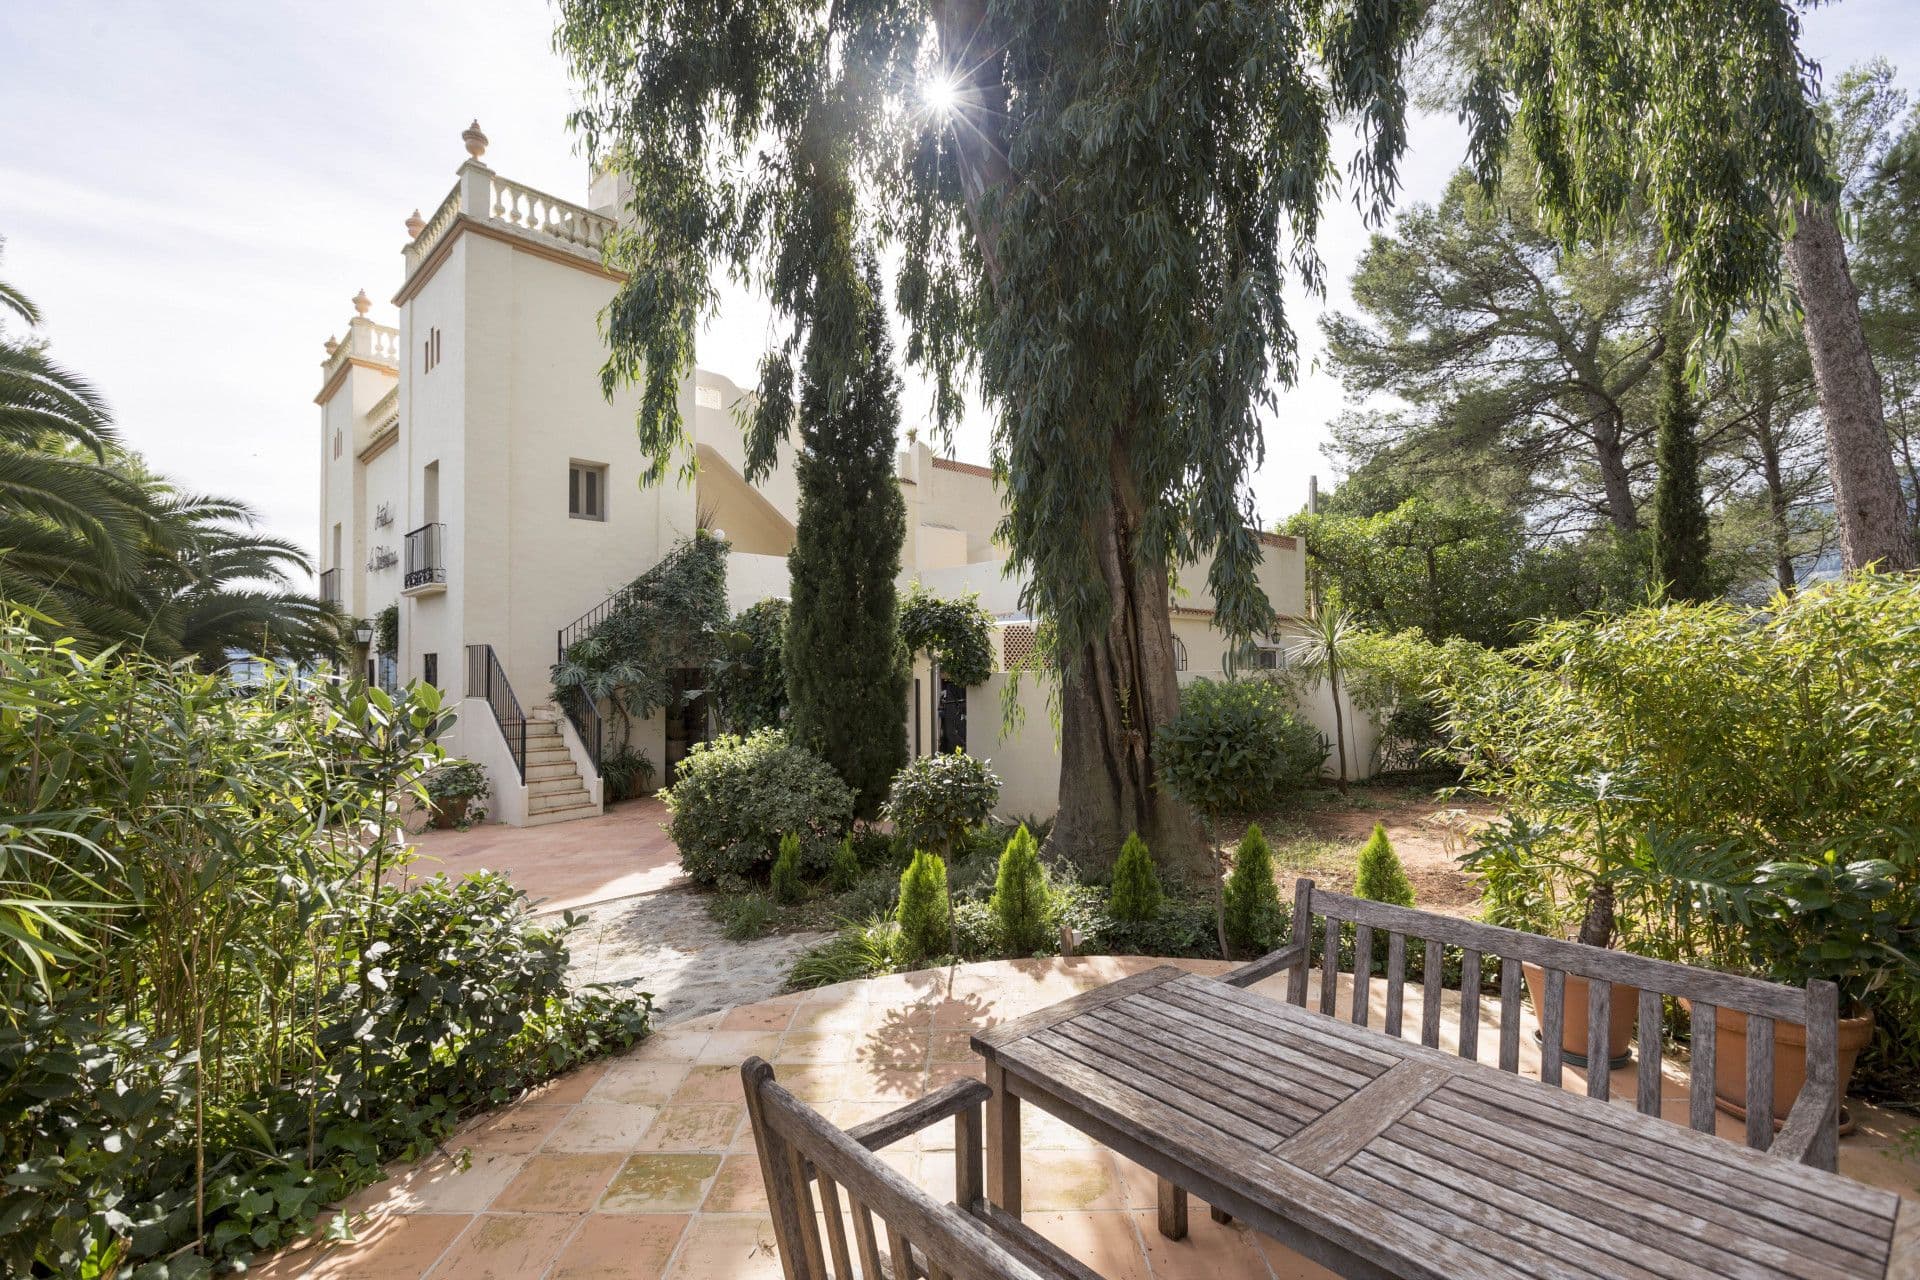 Small hotel in the middle of nature 5km from Gandía for sale. 